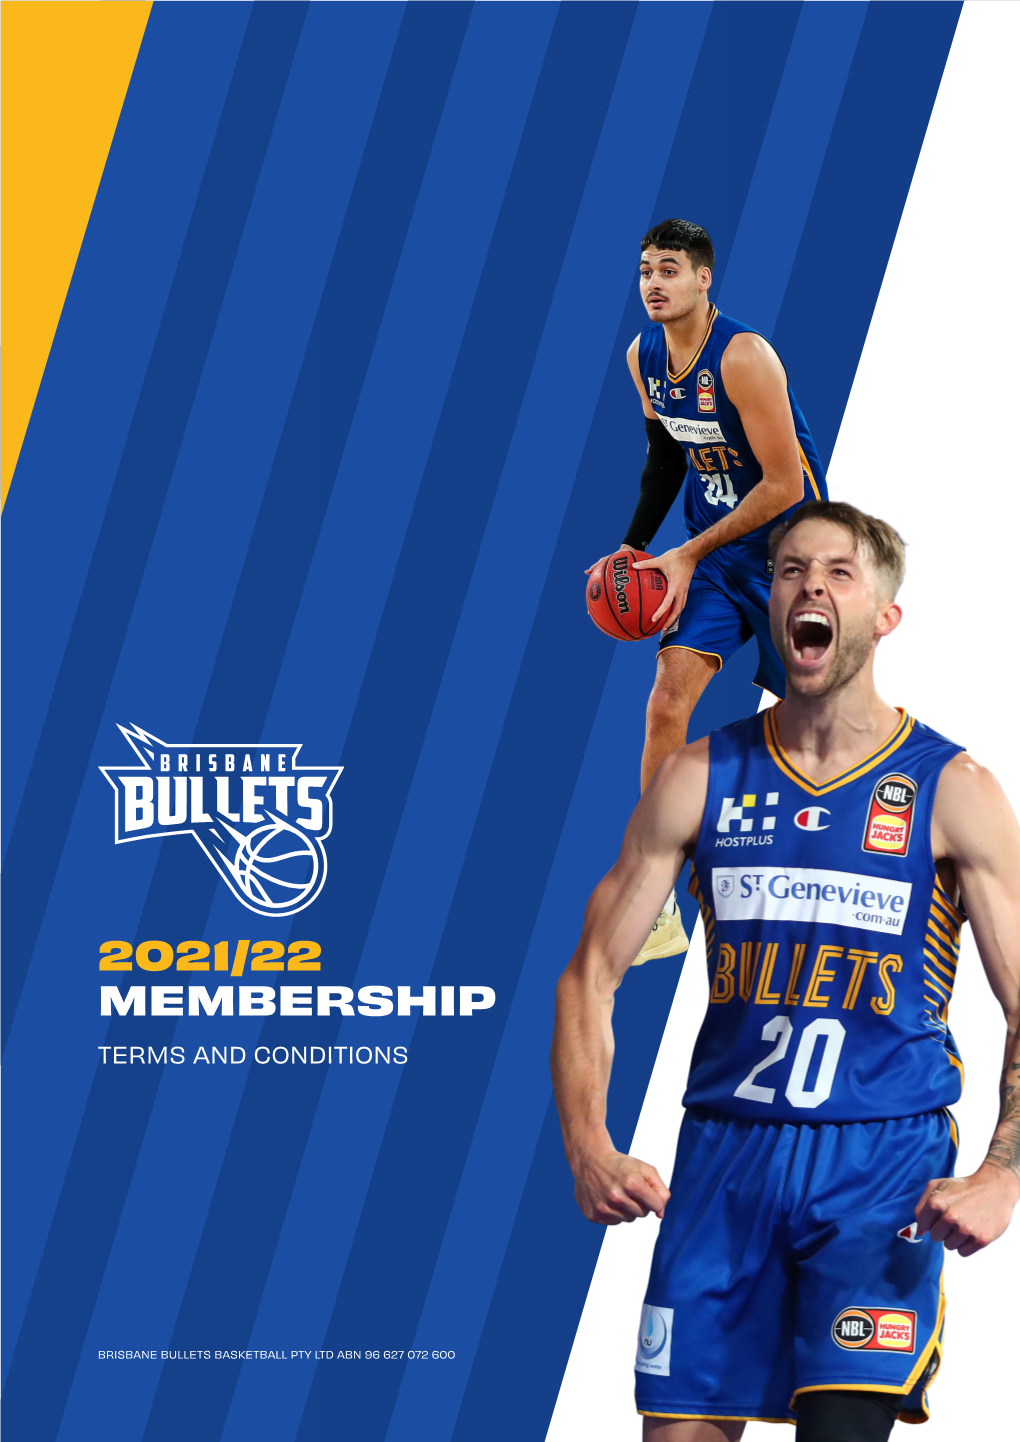 2021/22 Membership Terms and Conditions